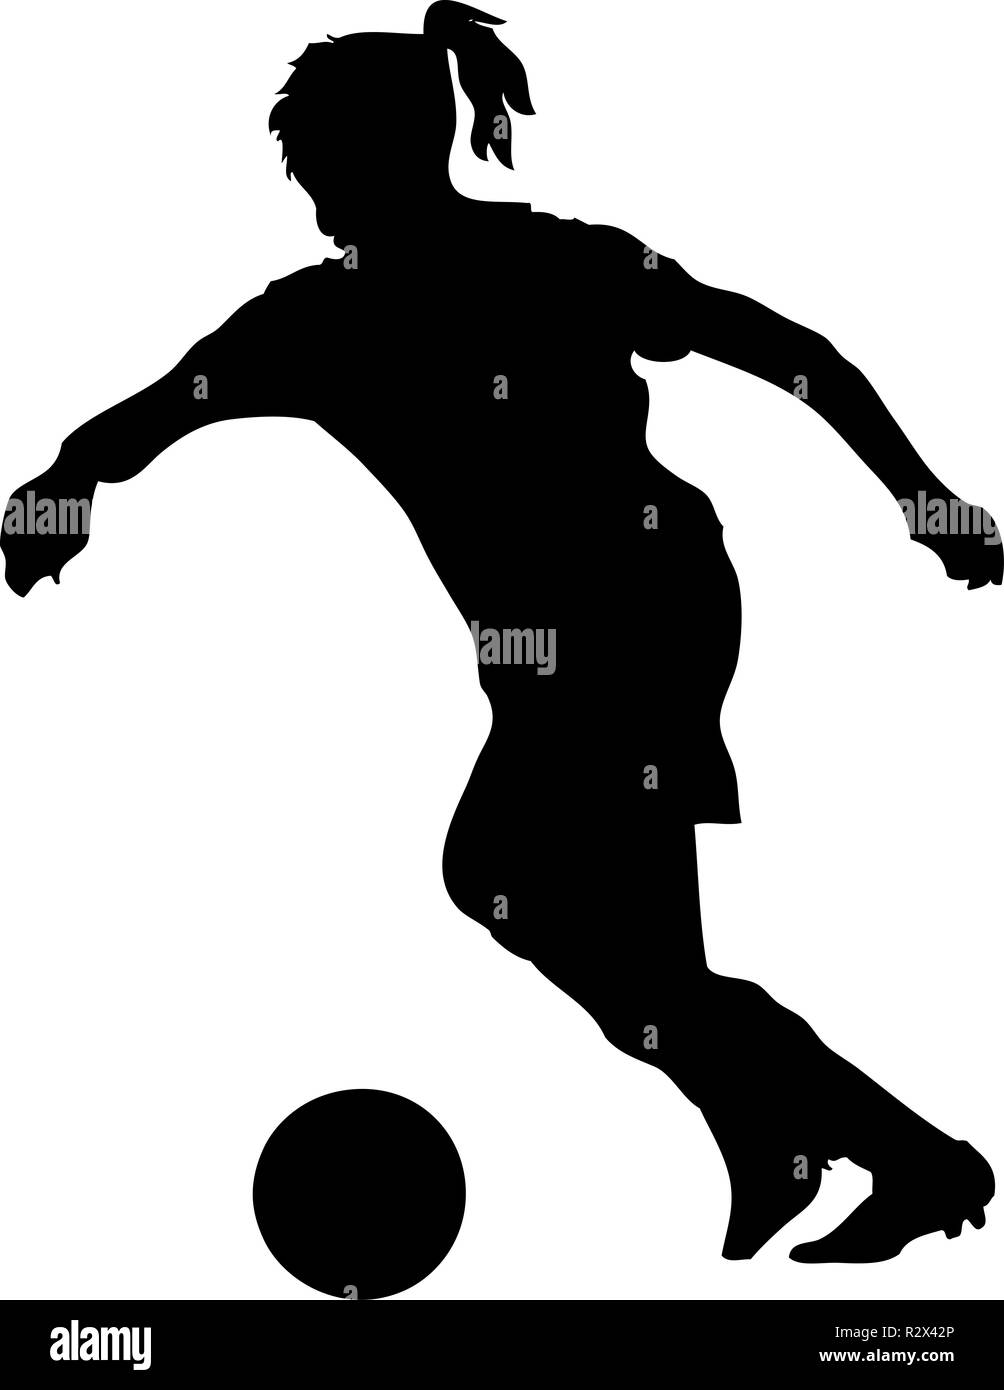 silhouette soccer player Stock Photo